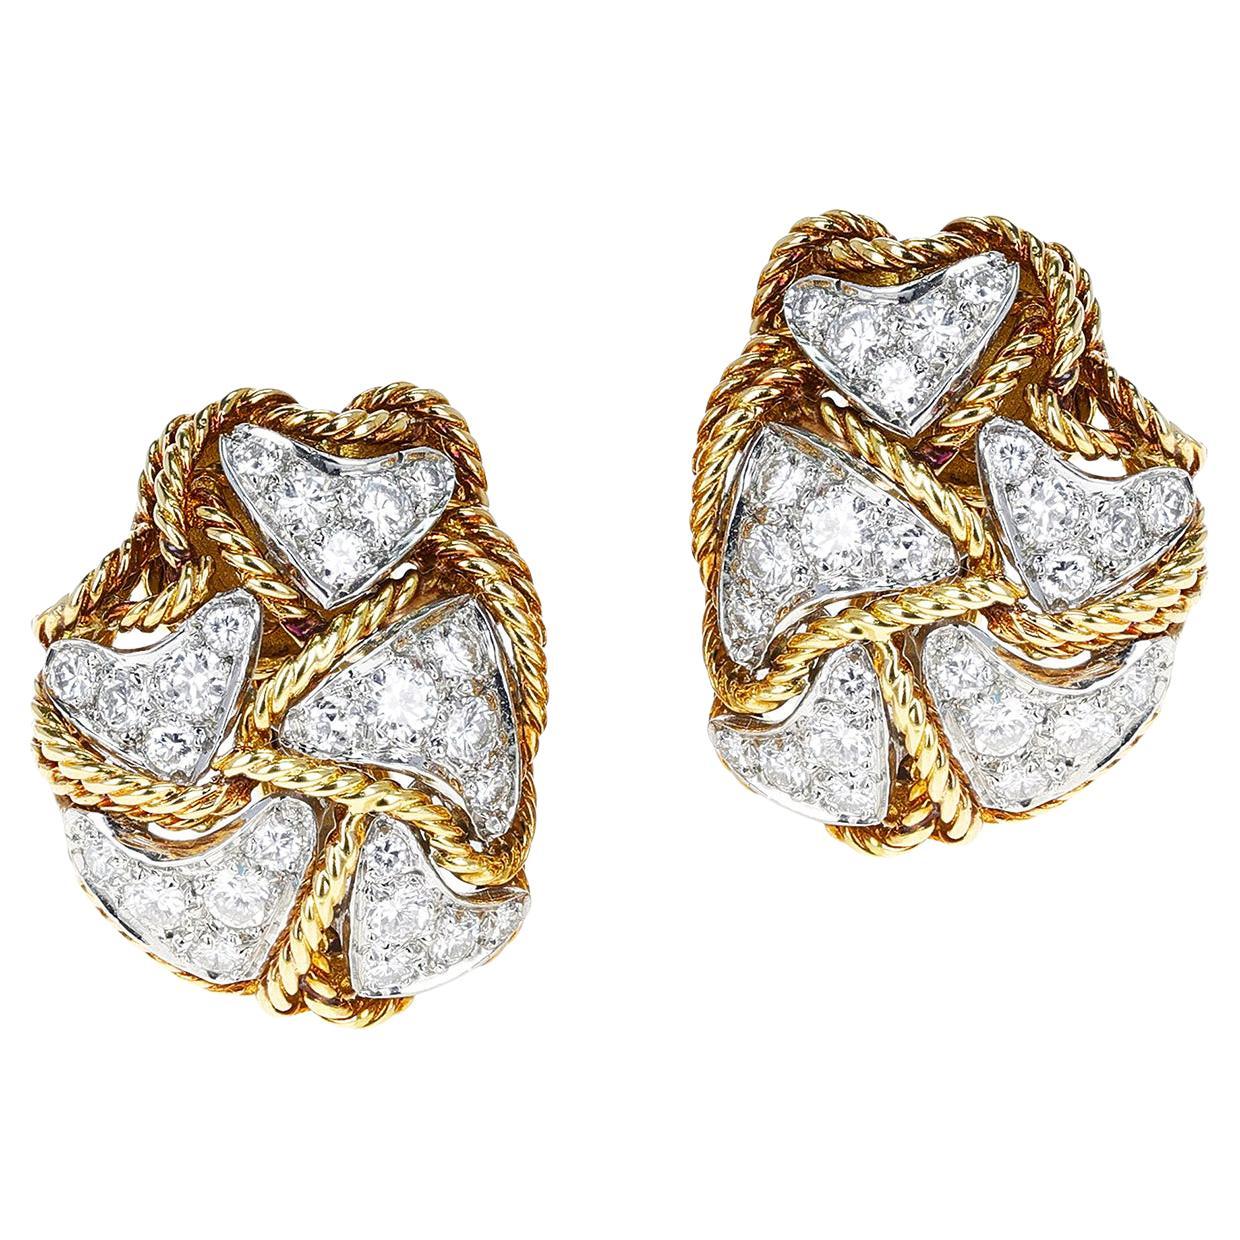 1960's Cartier 3.25 Carats Diamond Cocktail Earrings in 18K Yellow Gold For Sale